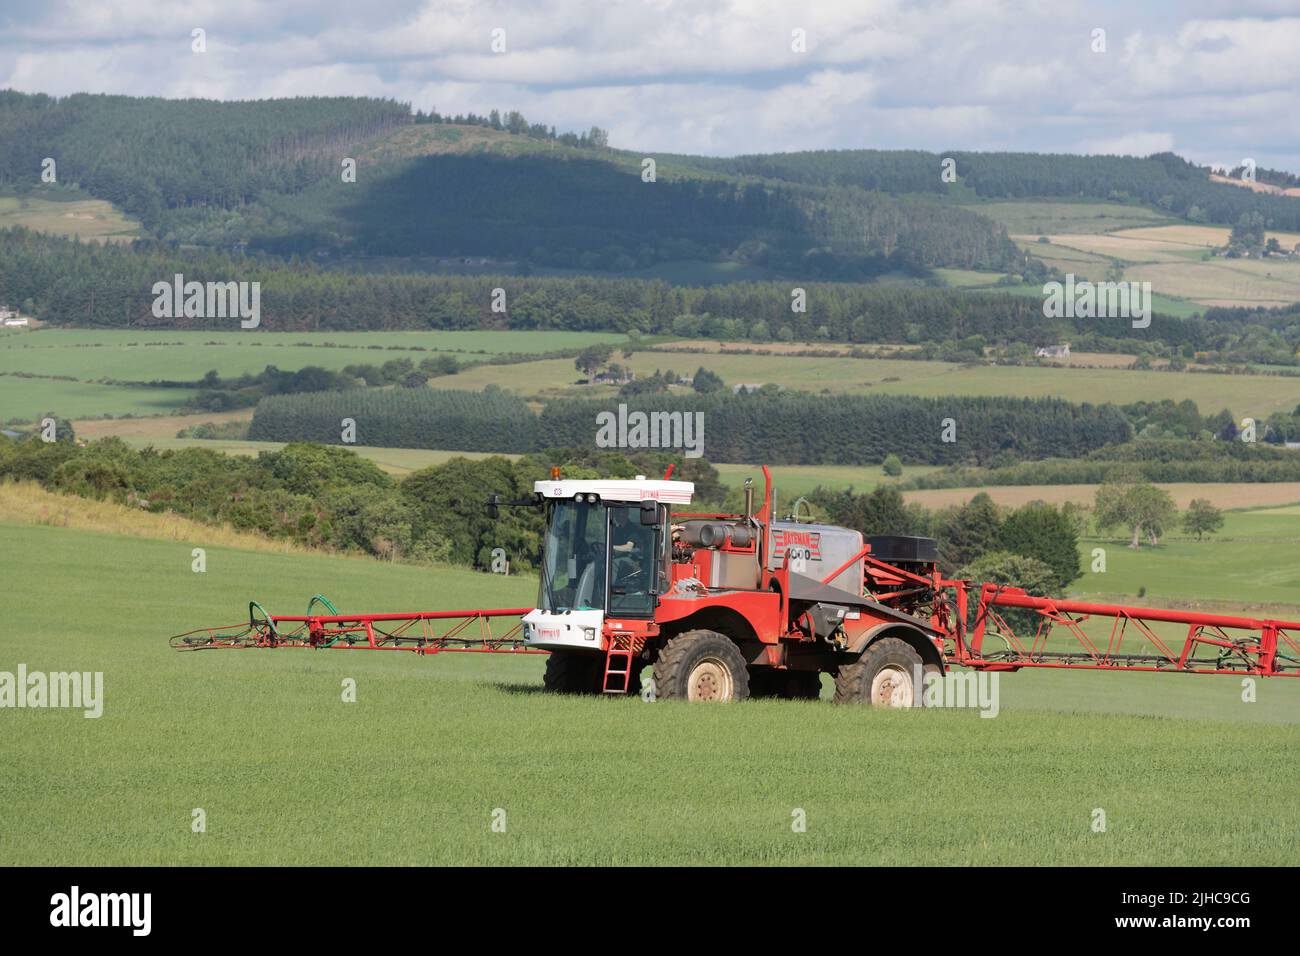 A Bateman Sprayer Spraying Barley in a Field in Aberdeenshire with Scenic Views Over the Surrounding Countryside Stock Photo